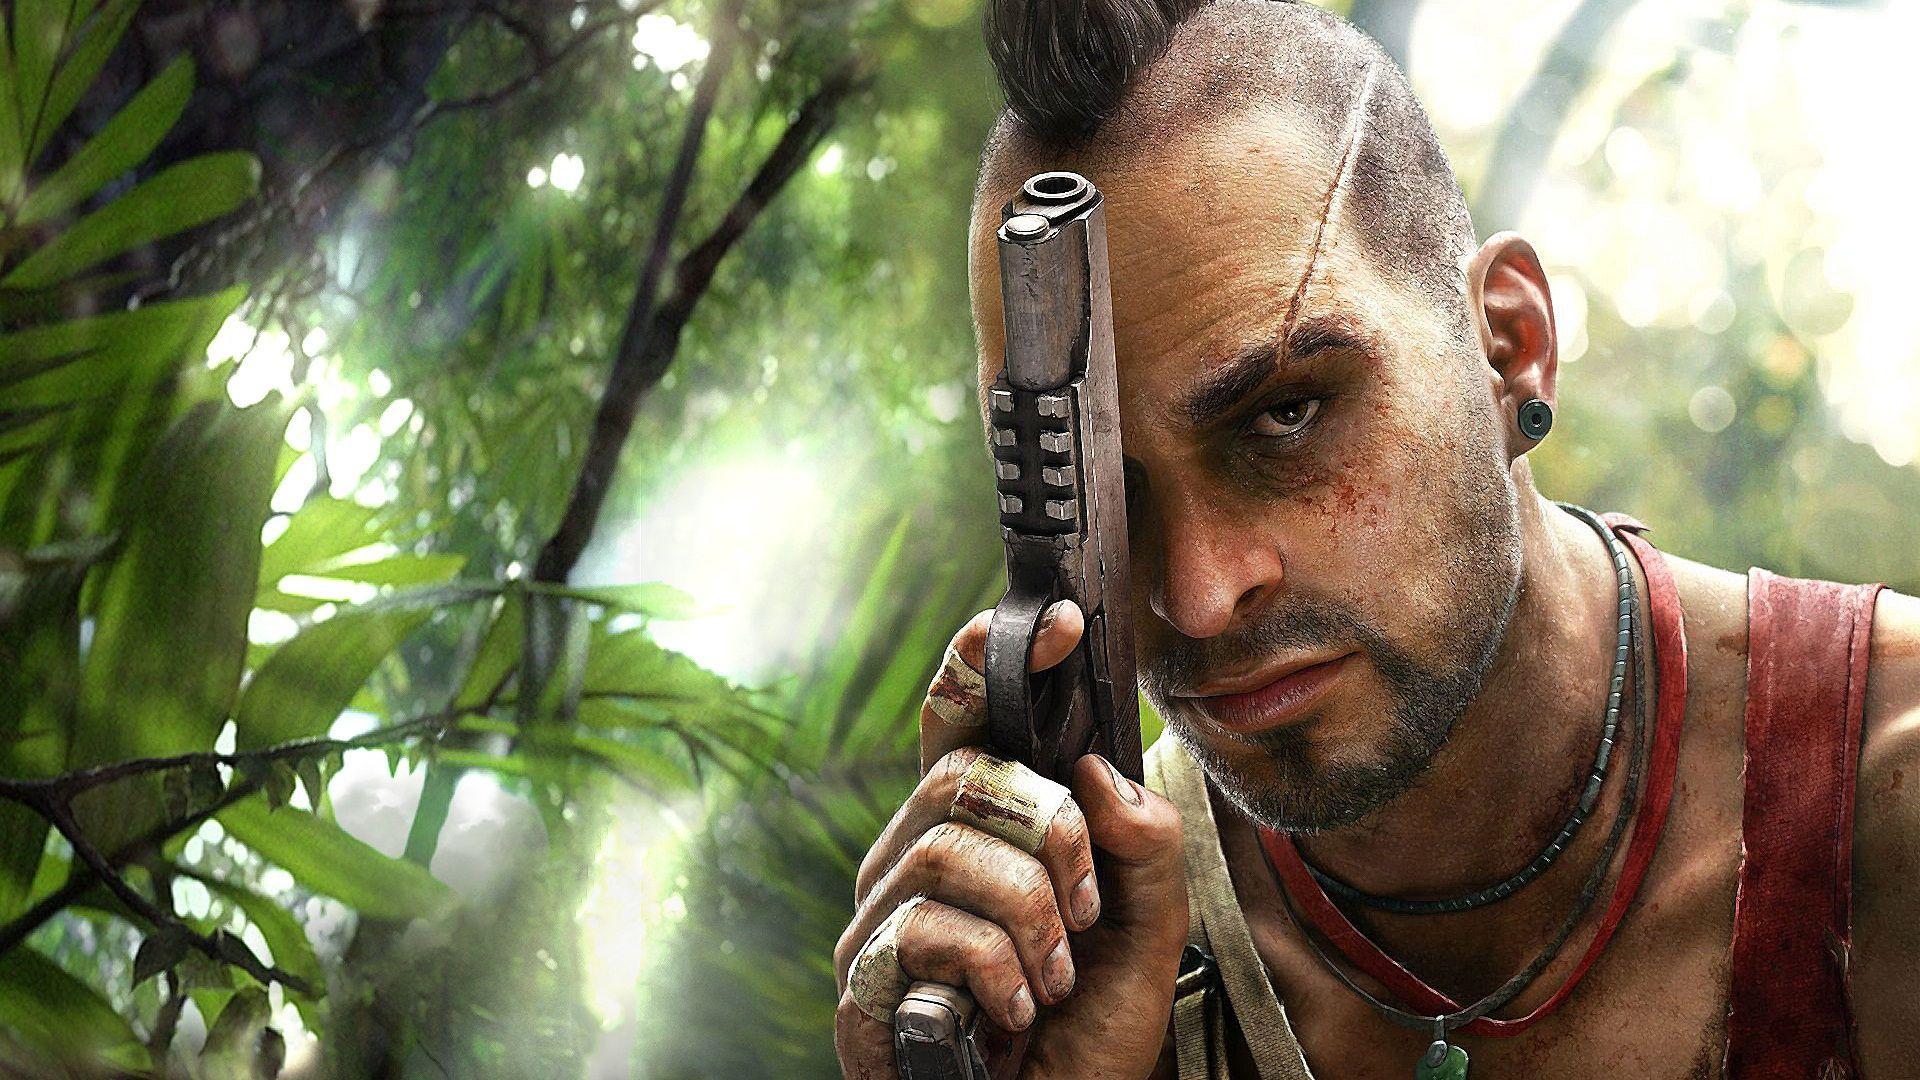 Far Cry 3 Wallpaper. Far Cry 3 Background and Image (43)